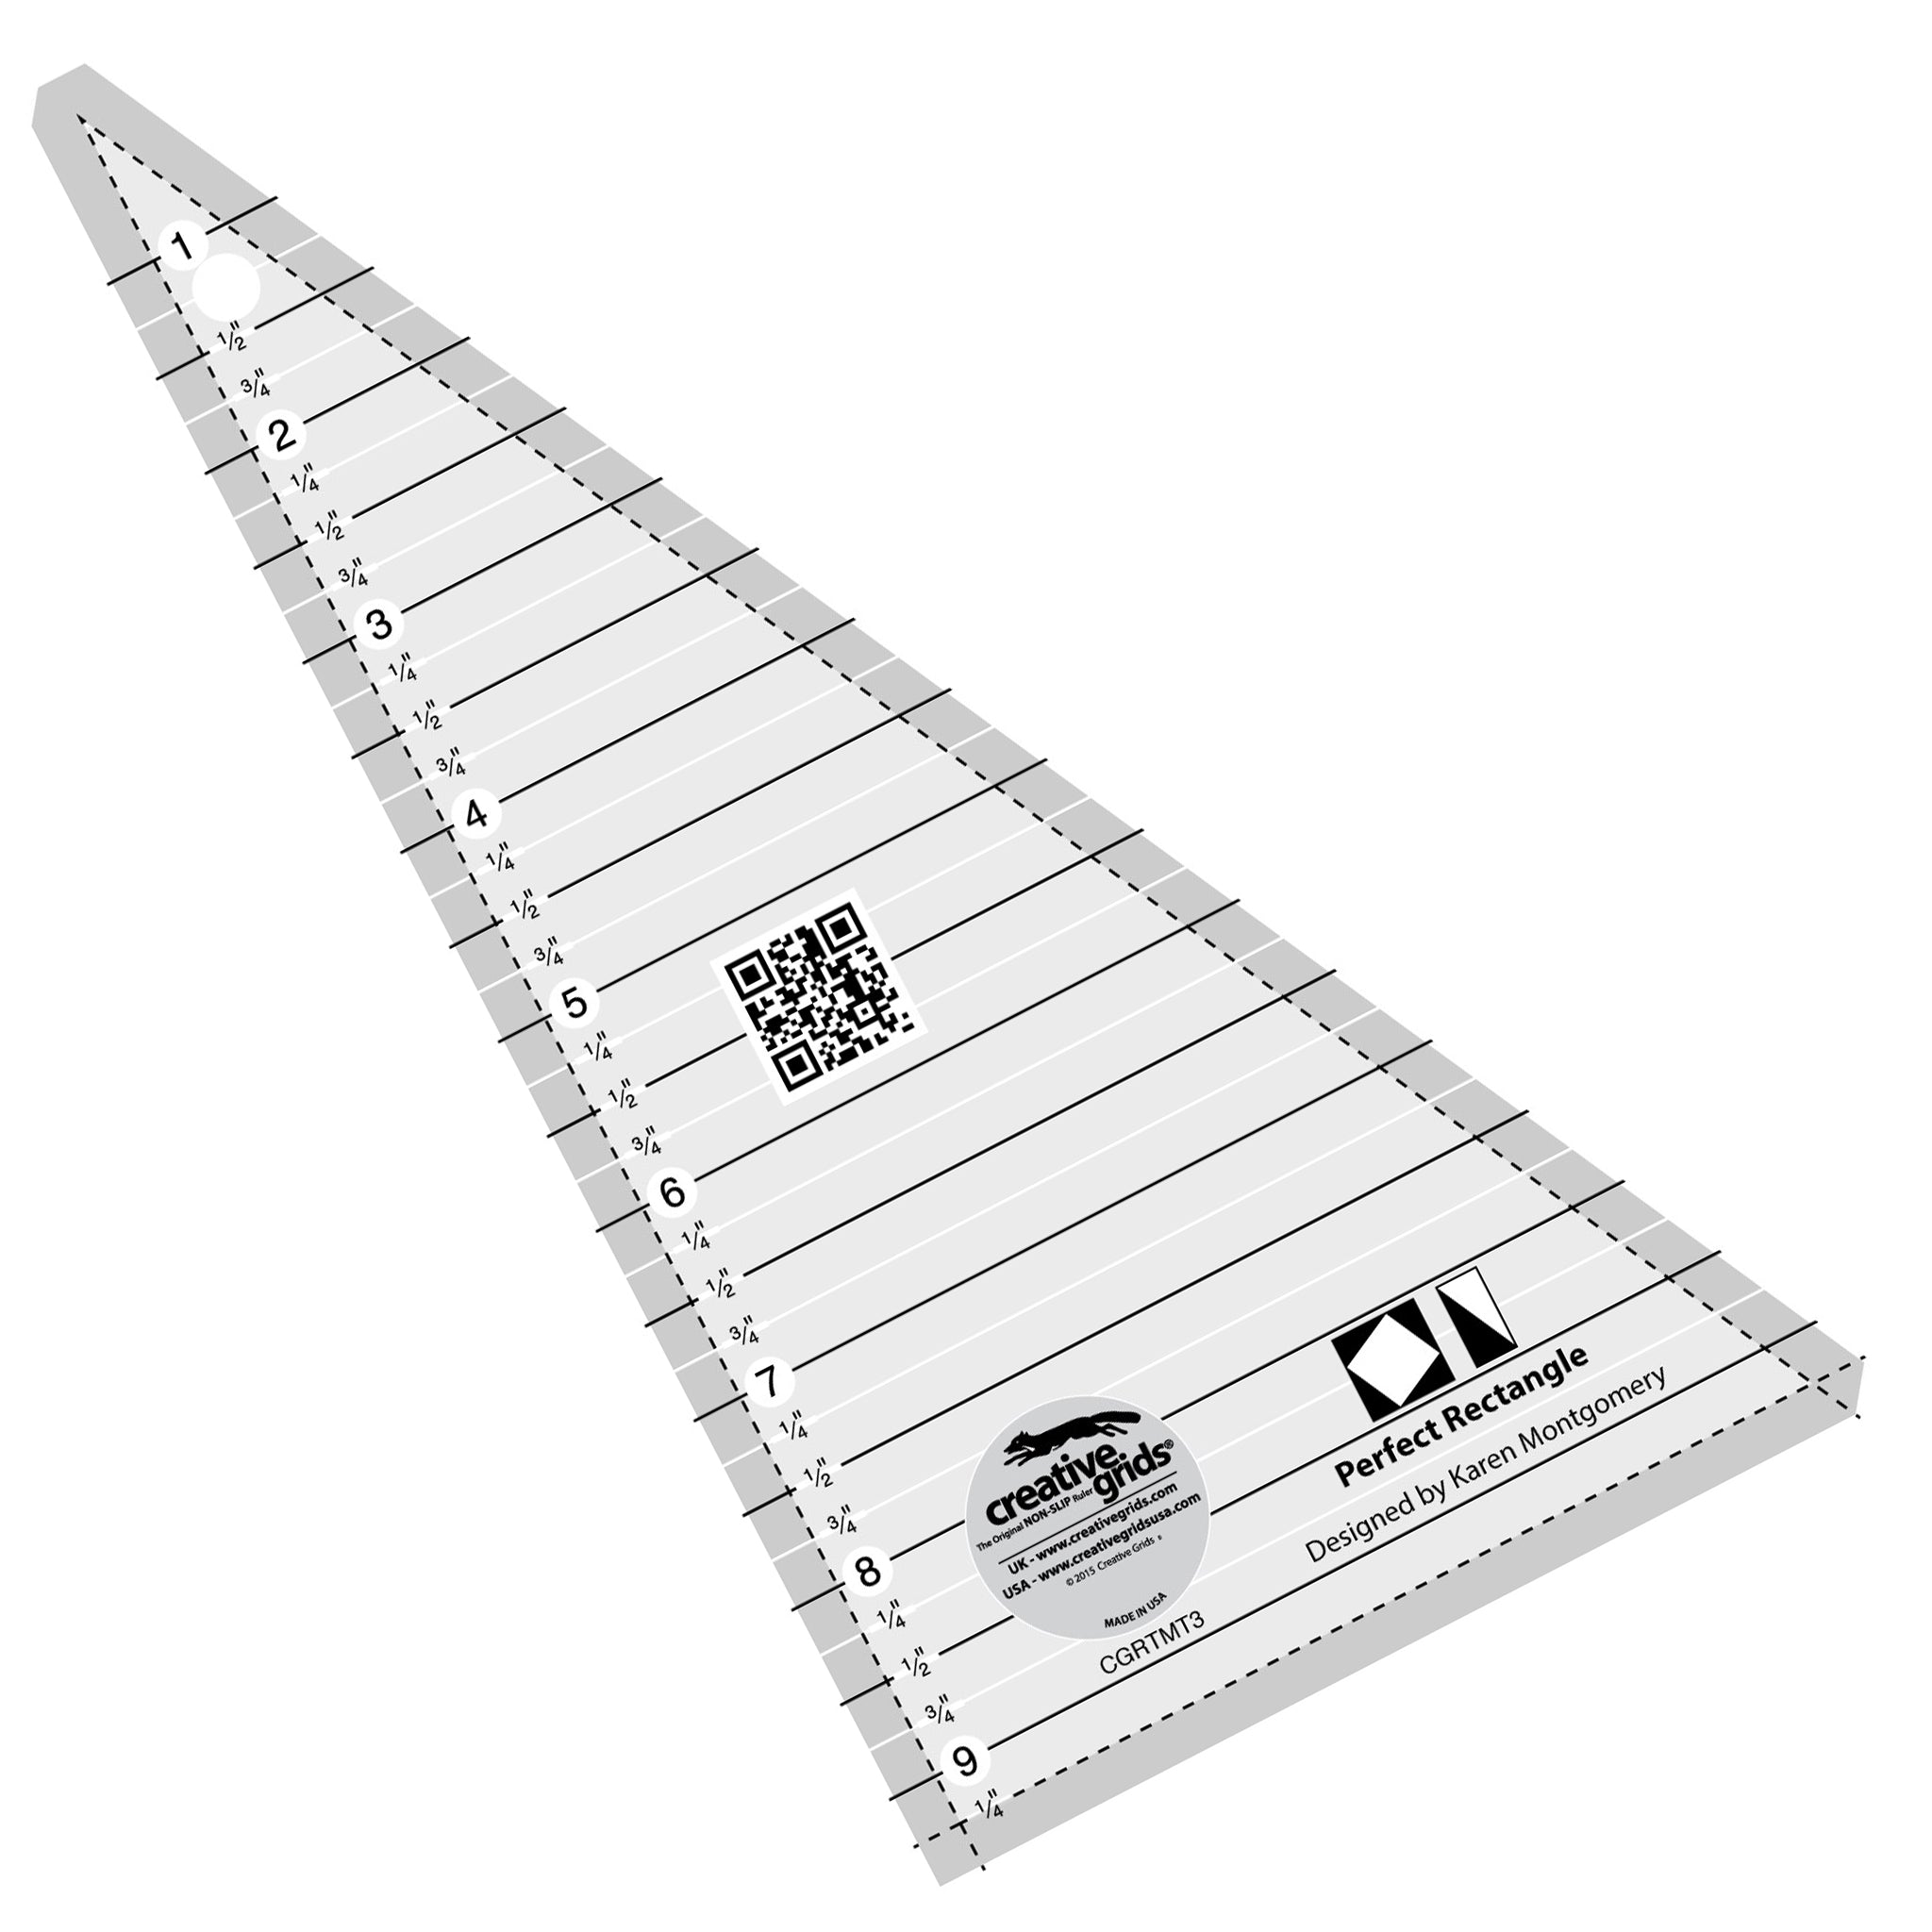 Creative Grids Perfect Rectangle Quilt Ruler (CGRTMT3)